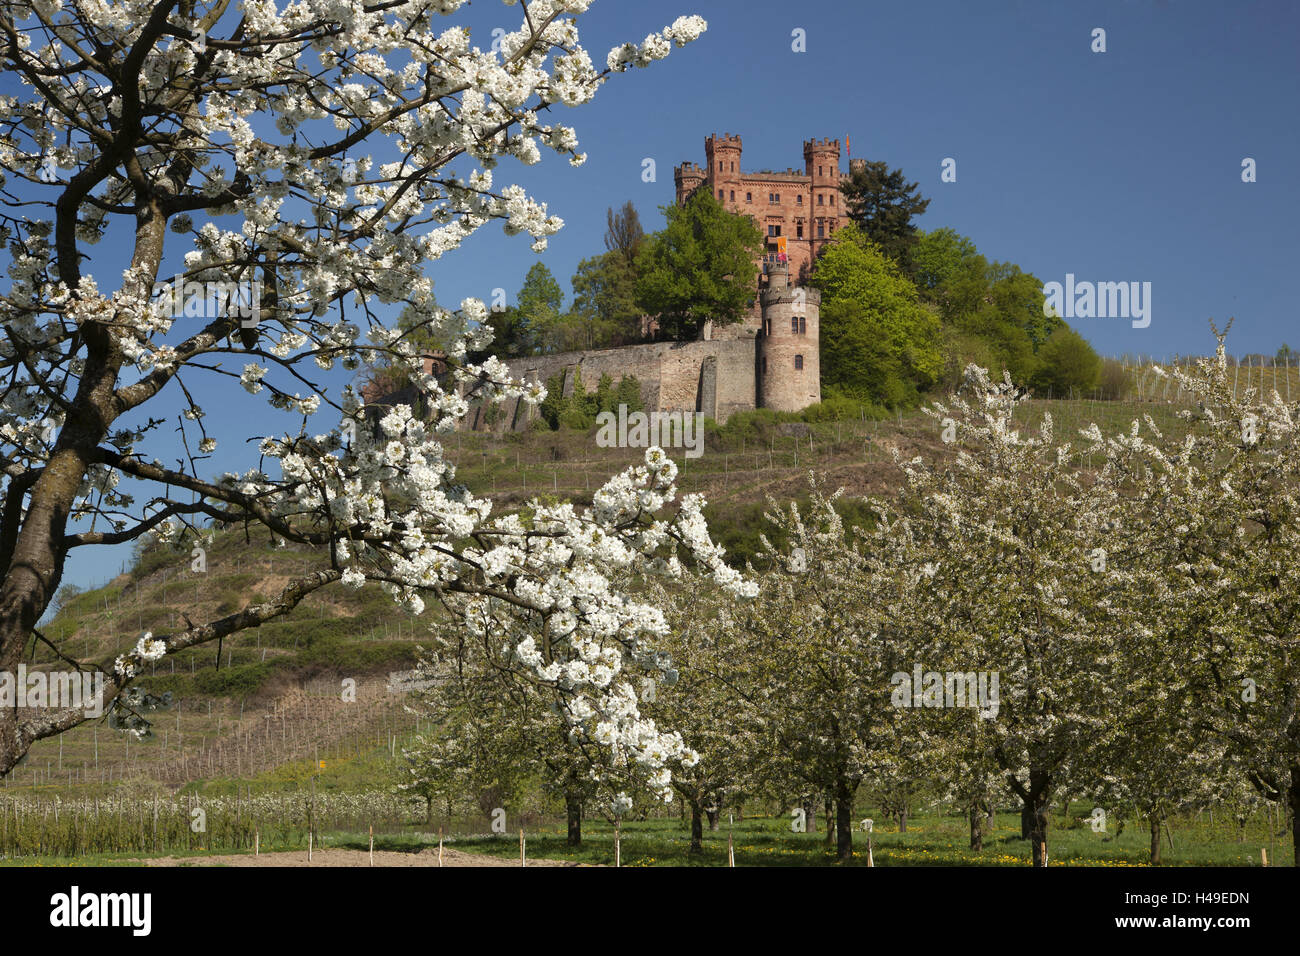 Germany, Black Forest, Ortenau, castle local mountain, sunshine, Kinzigtal, lock, outside, vineyard, wine-growing, spring, season, tree, blossoming of a tree, blossoms, blossom, white, gastronomy, restaurant, youth hostel, landmark, local mountain, heaven, blue, tourism, Stock Photo